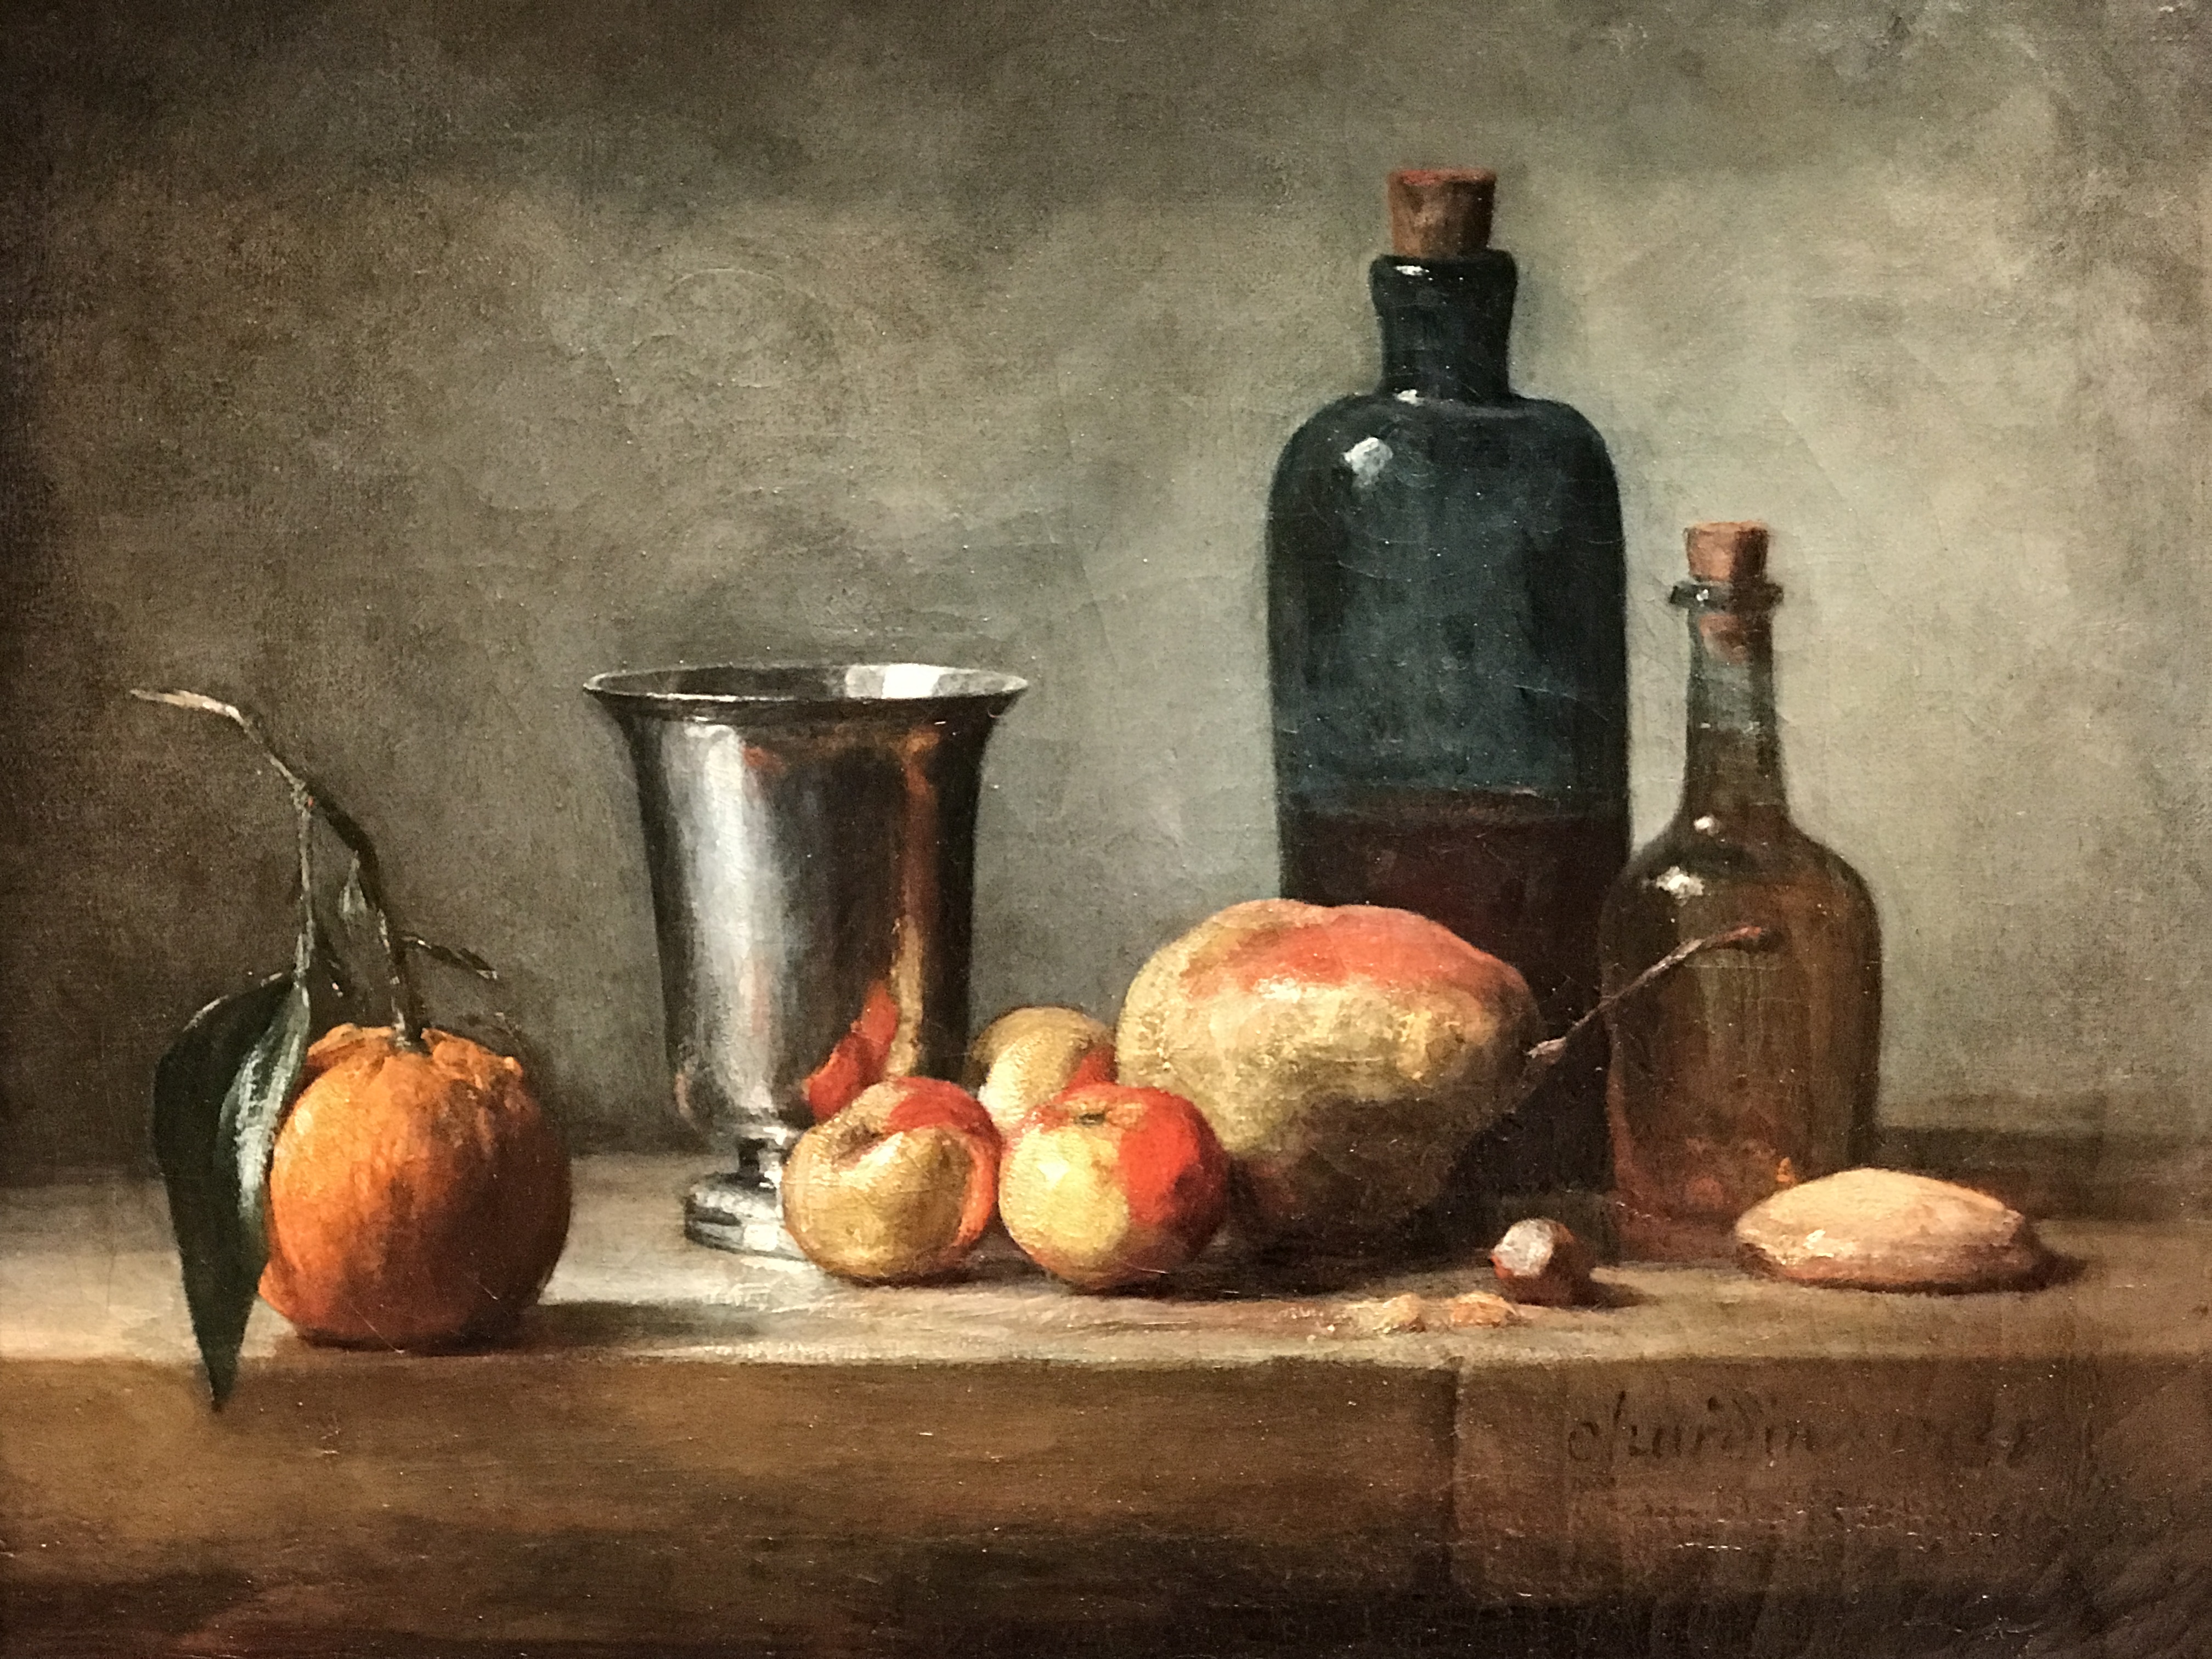 Seville Orange, Silver Goblet, Lady Apples, Pear, and Two Bottles, by Jean Siméon Chardin, my photo